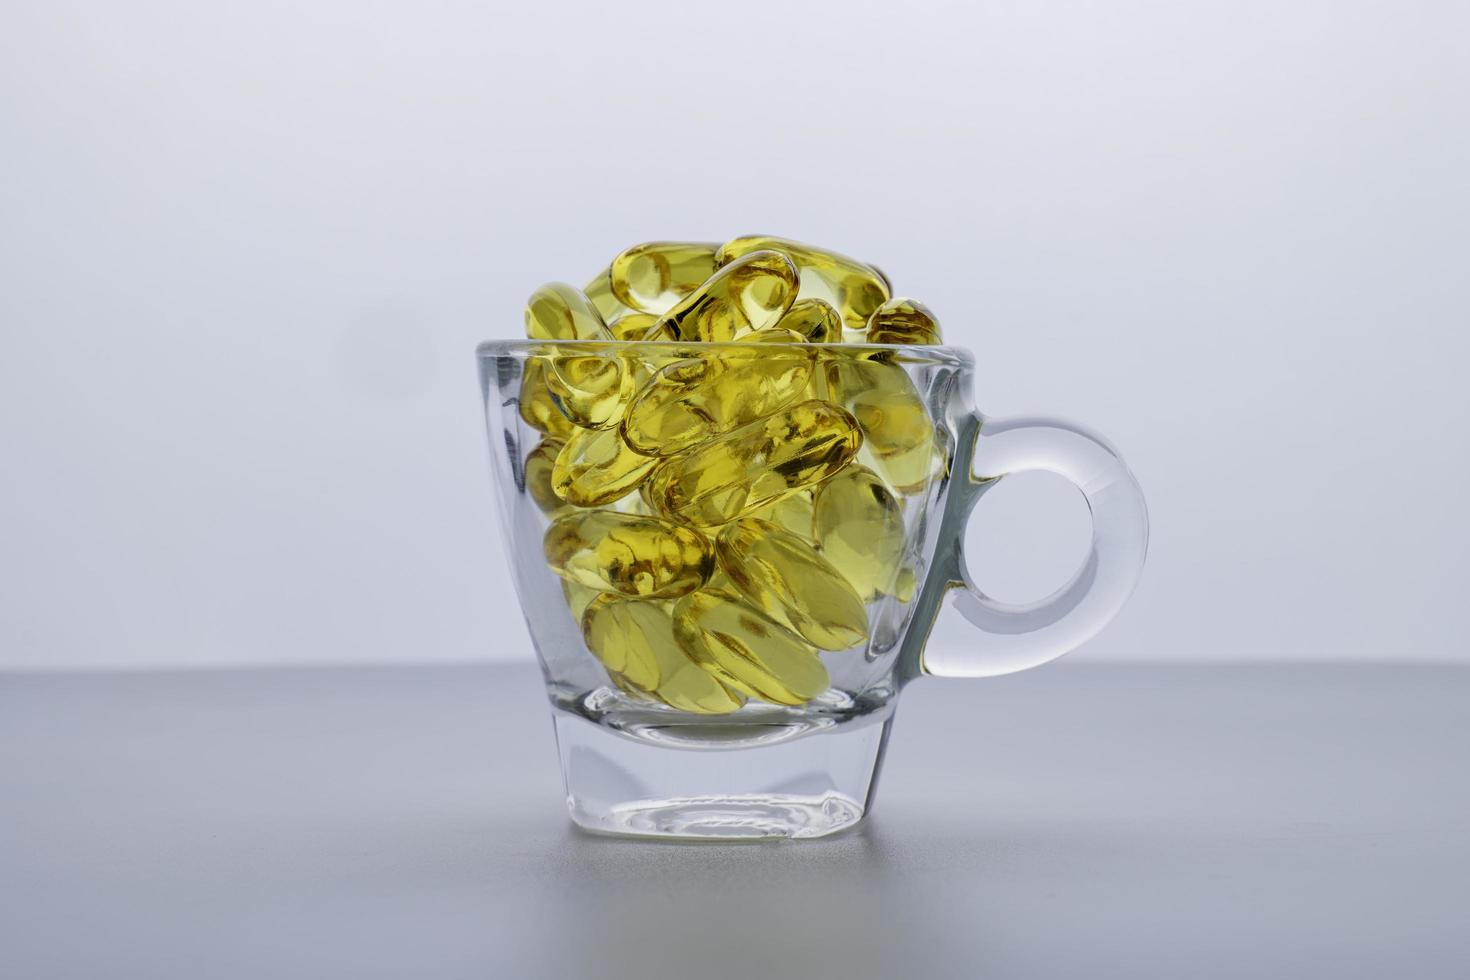 omega 3 fish oil The capsule is in a clear glass. isolated on a white background. photo